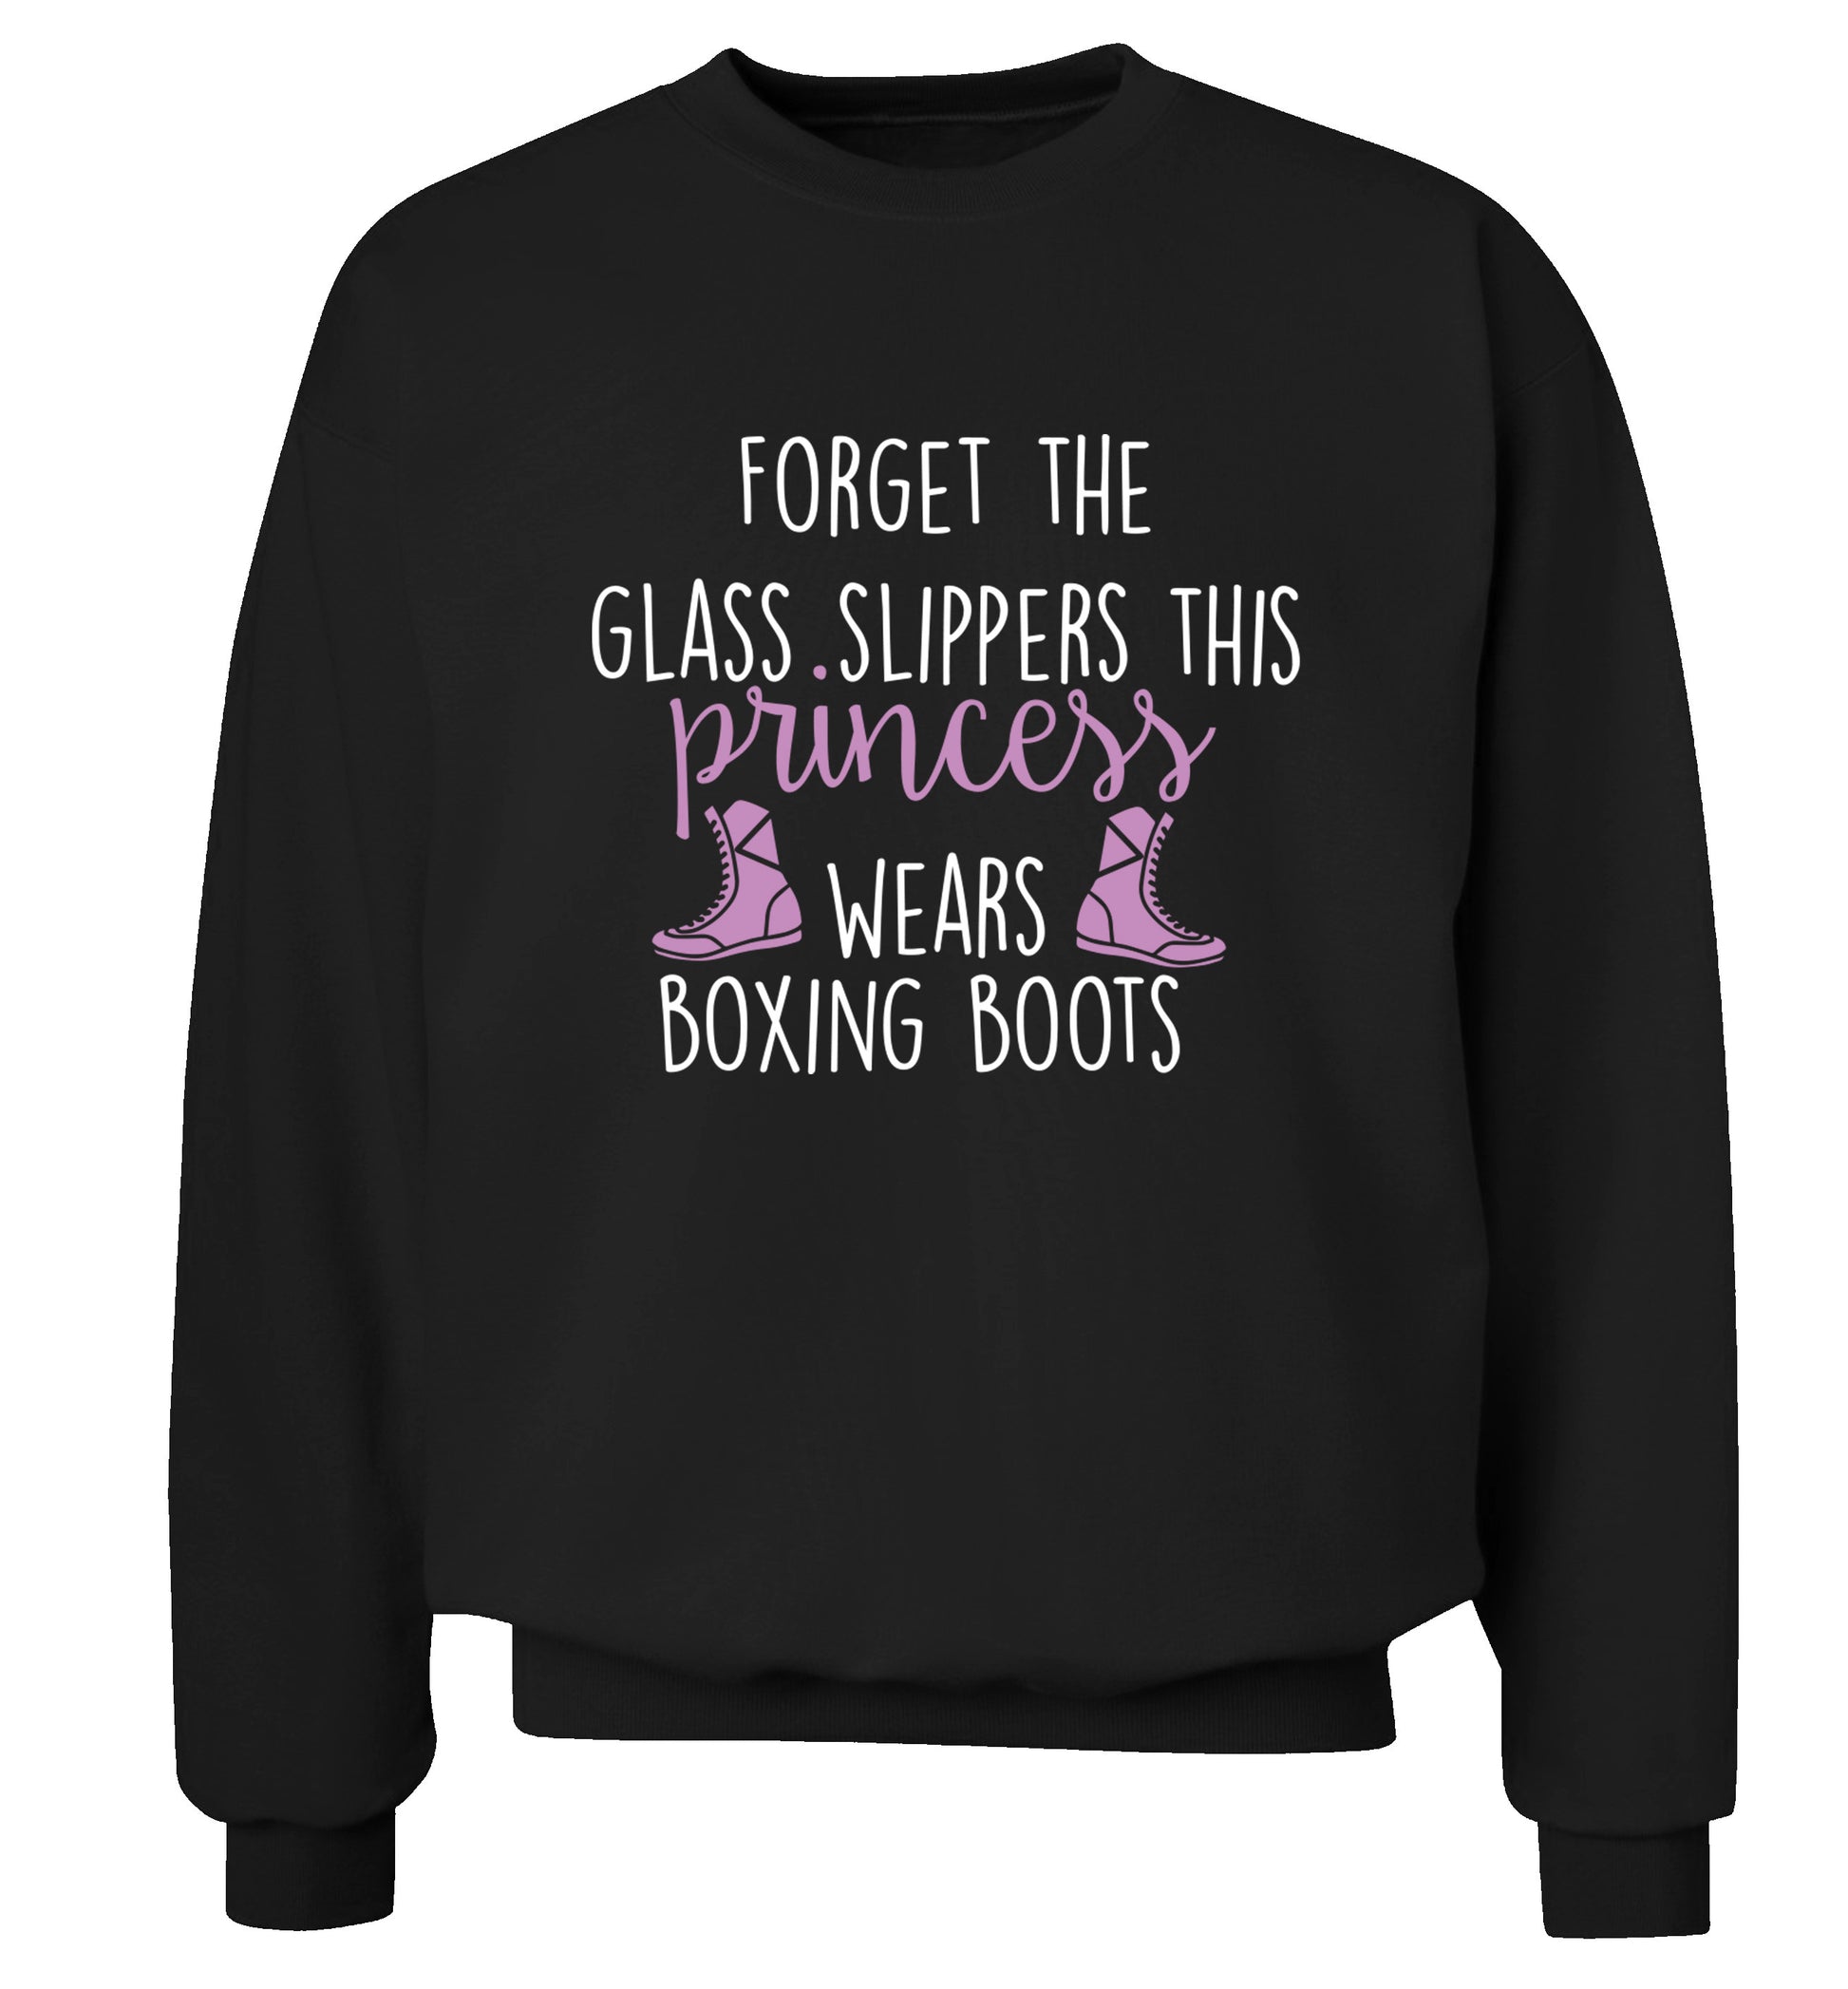 Forget the glass slippers this princess wears boxing boots Adult's unisex black Sweater 2XL